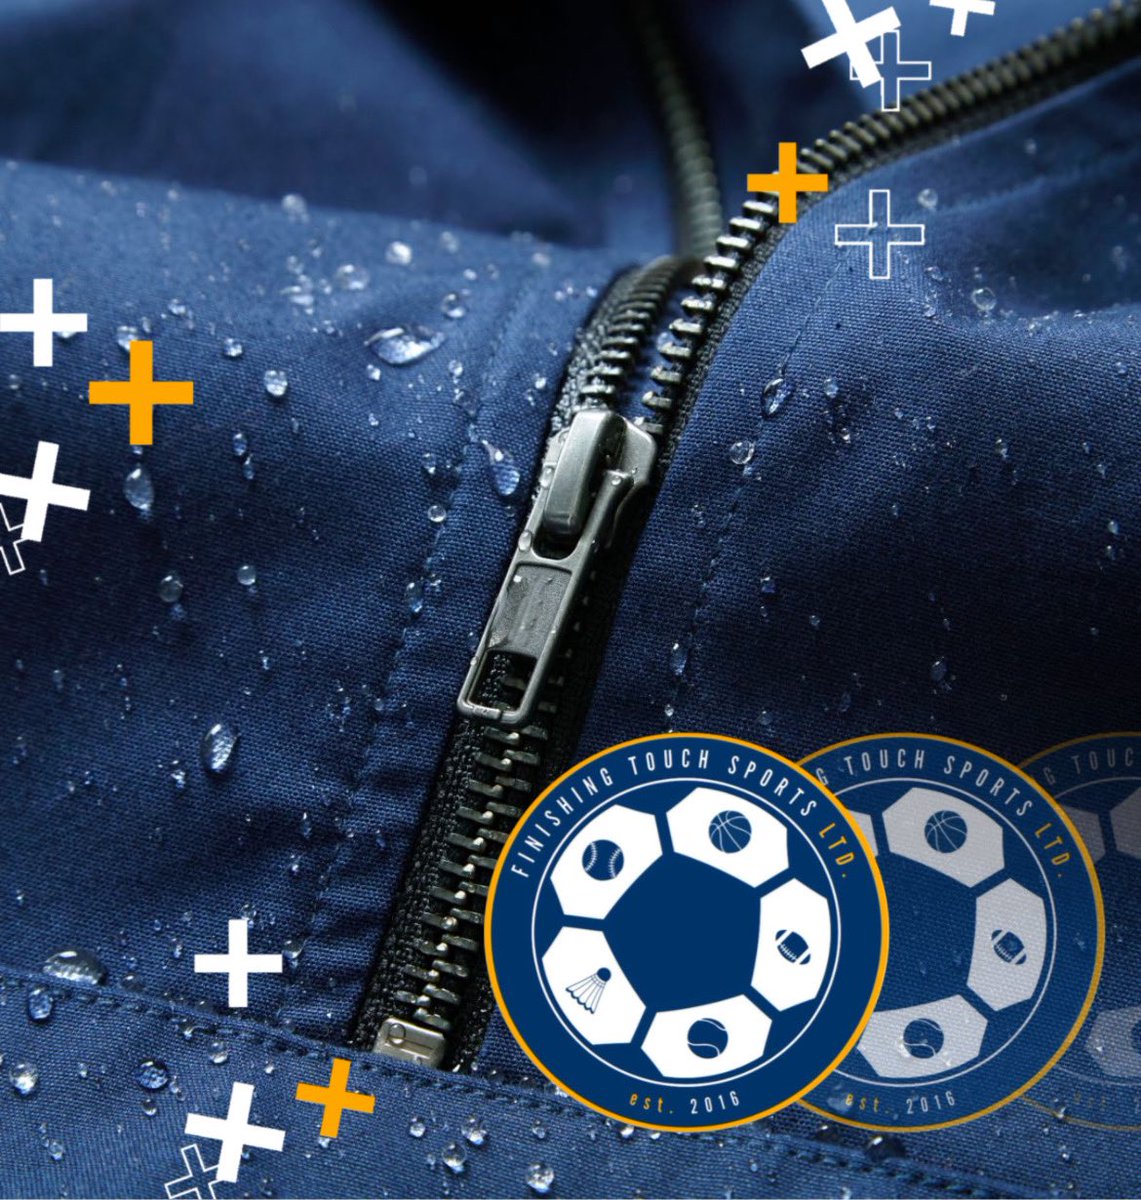 ❄️☔️…

Reminder: As the weather begins to get colder and wetter, ensure your child is equipped correctly for outdoor sessions.

• Waterproof Jacket
• Jumper
• Gloves/Hat
• Footwear

#findyourfinishingtouch  
#stalbansmums 
#stalbansdads
#stalbanslife 
#stalbansbusinesses